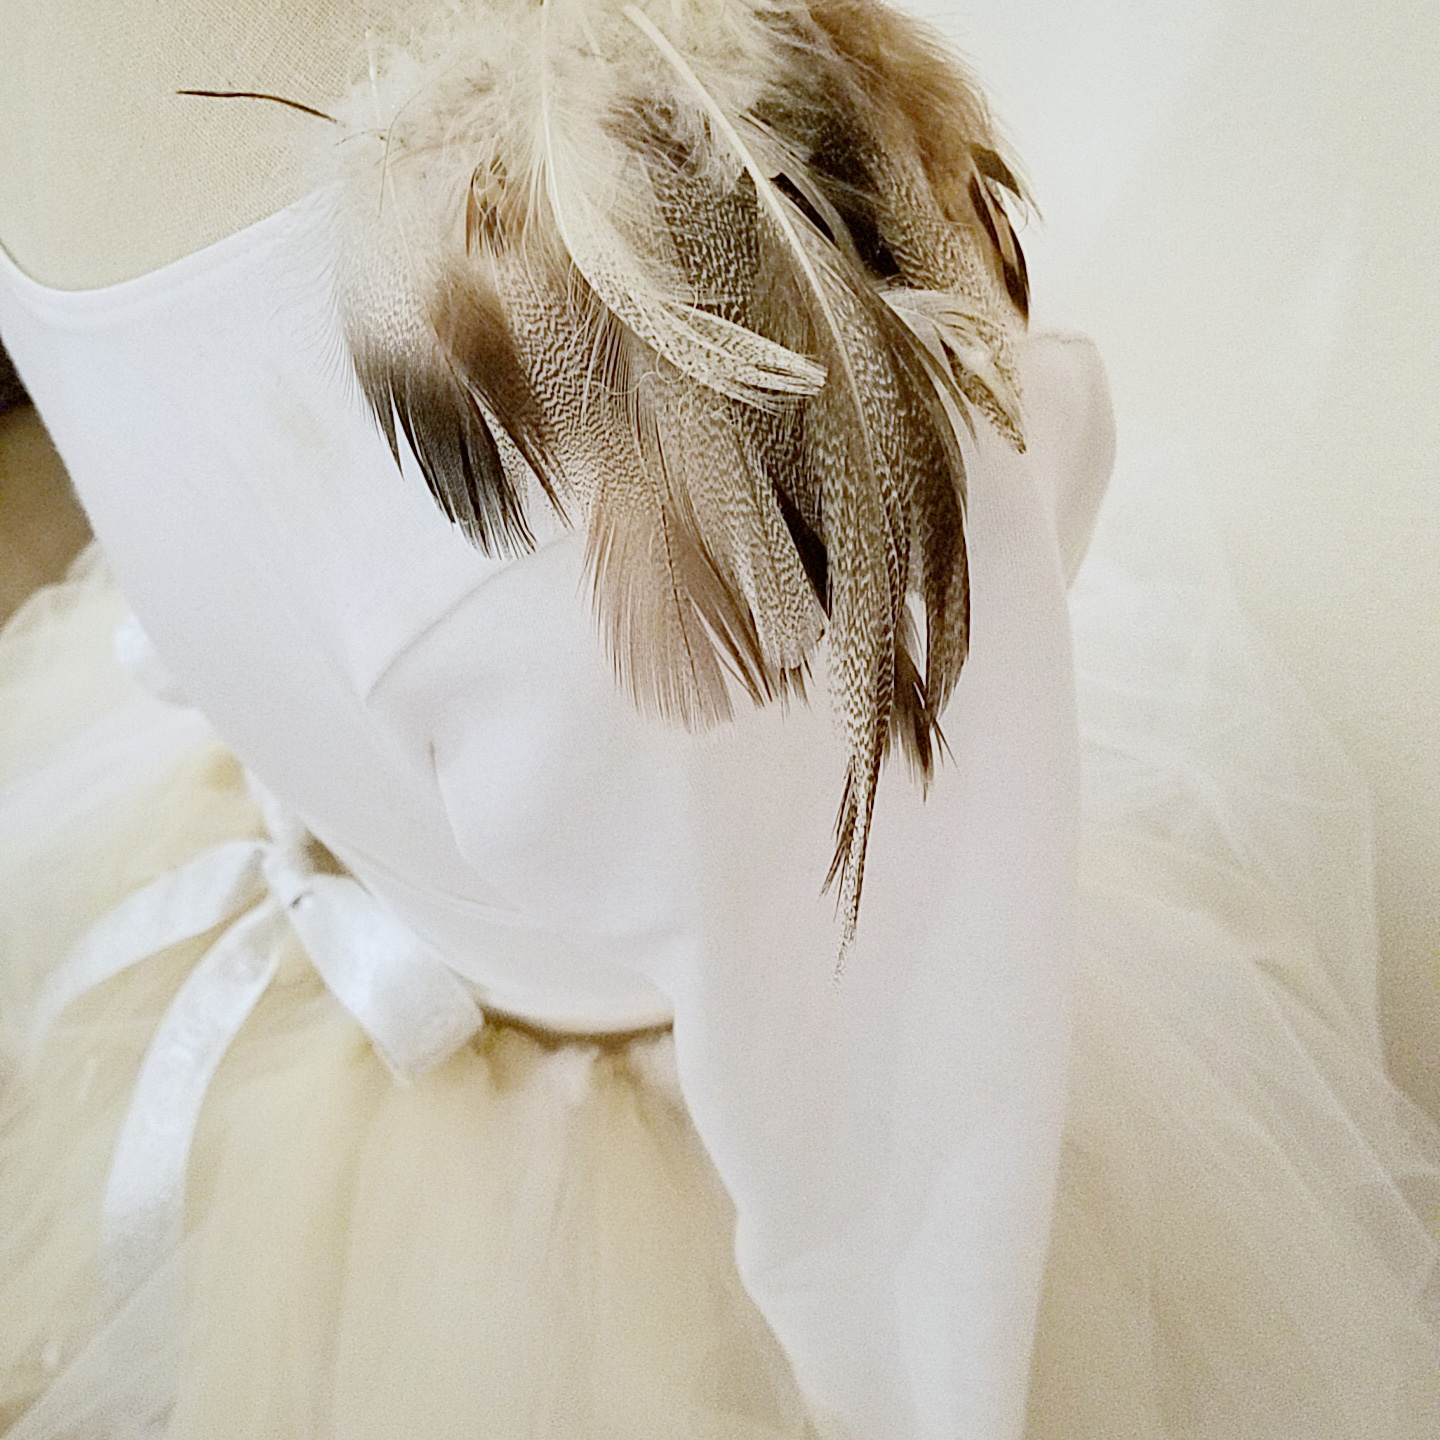 DIY Tutorial on How to Make a Tutu Skirt and a Bird Costume